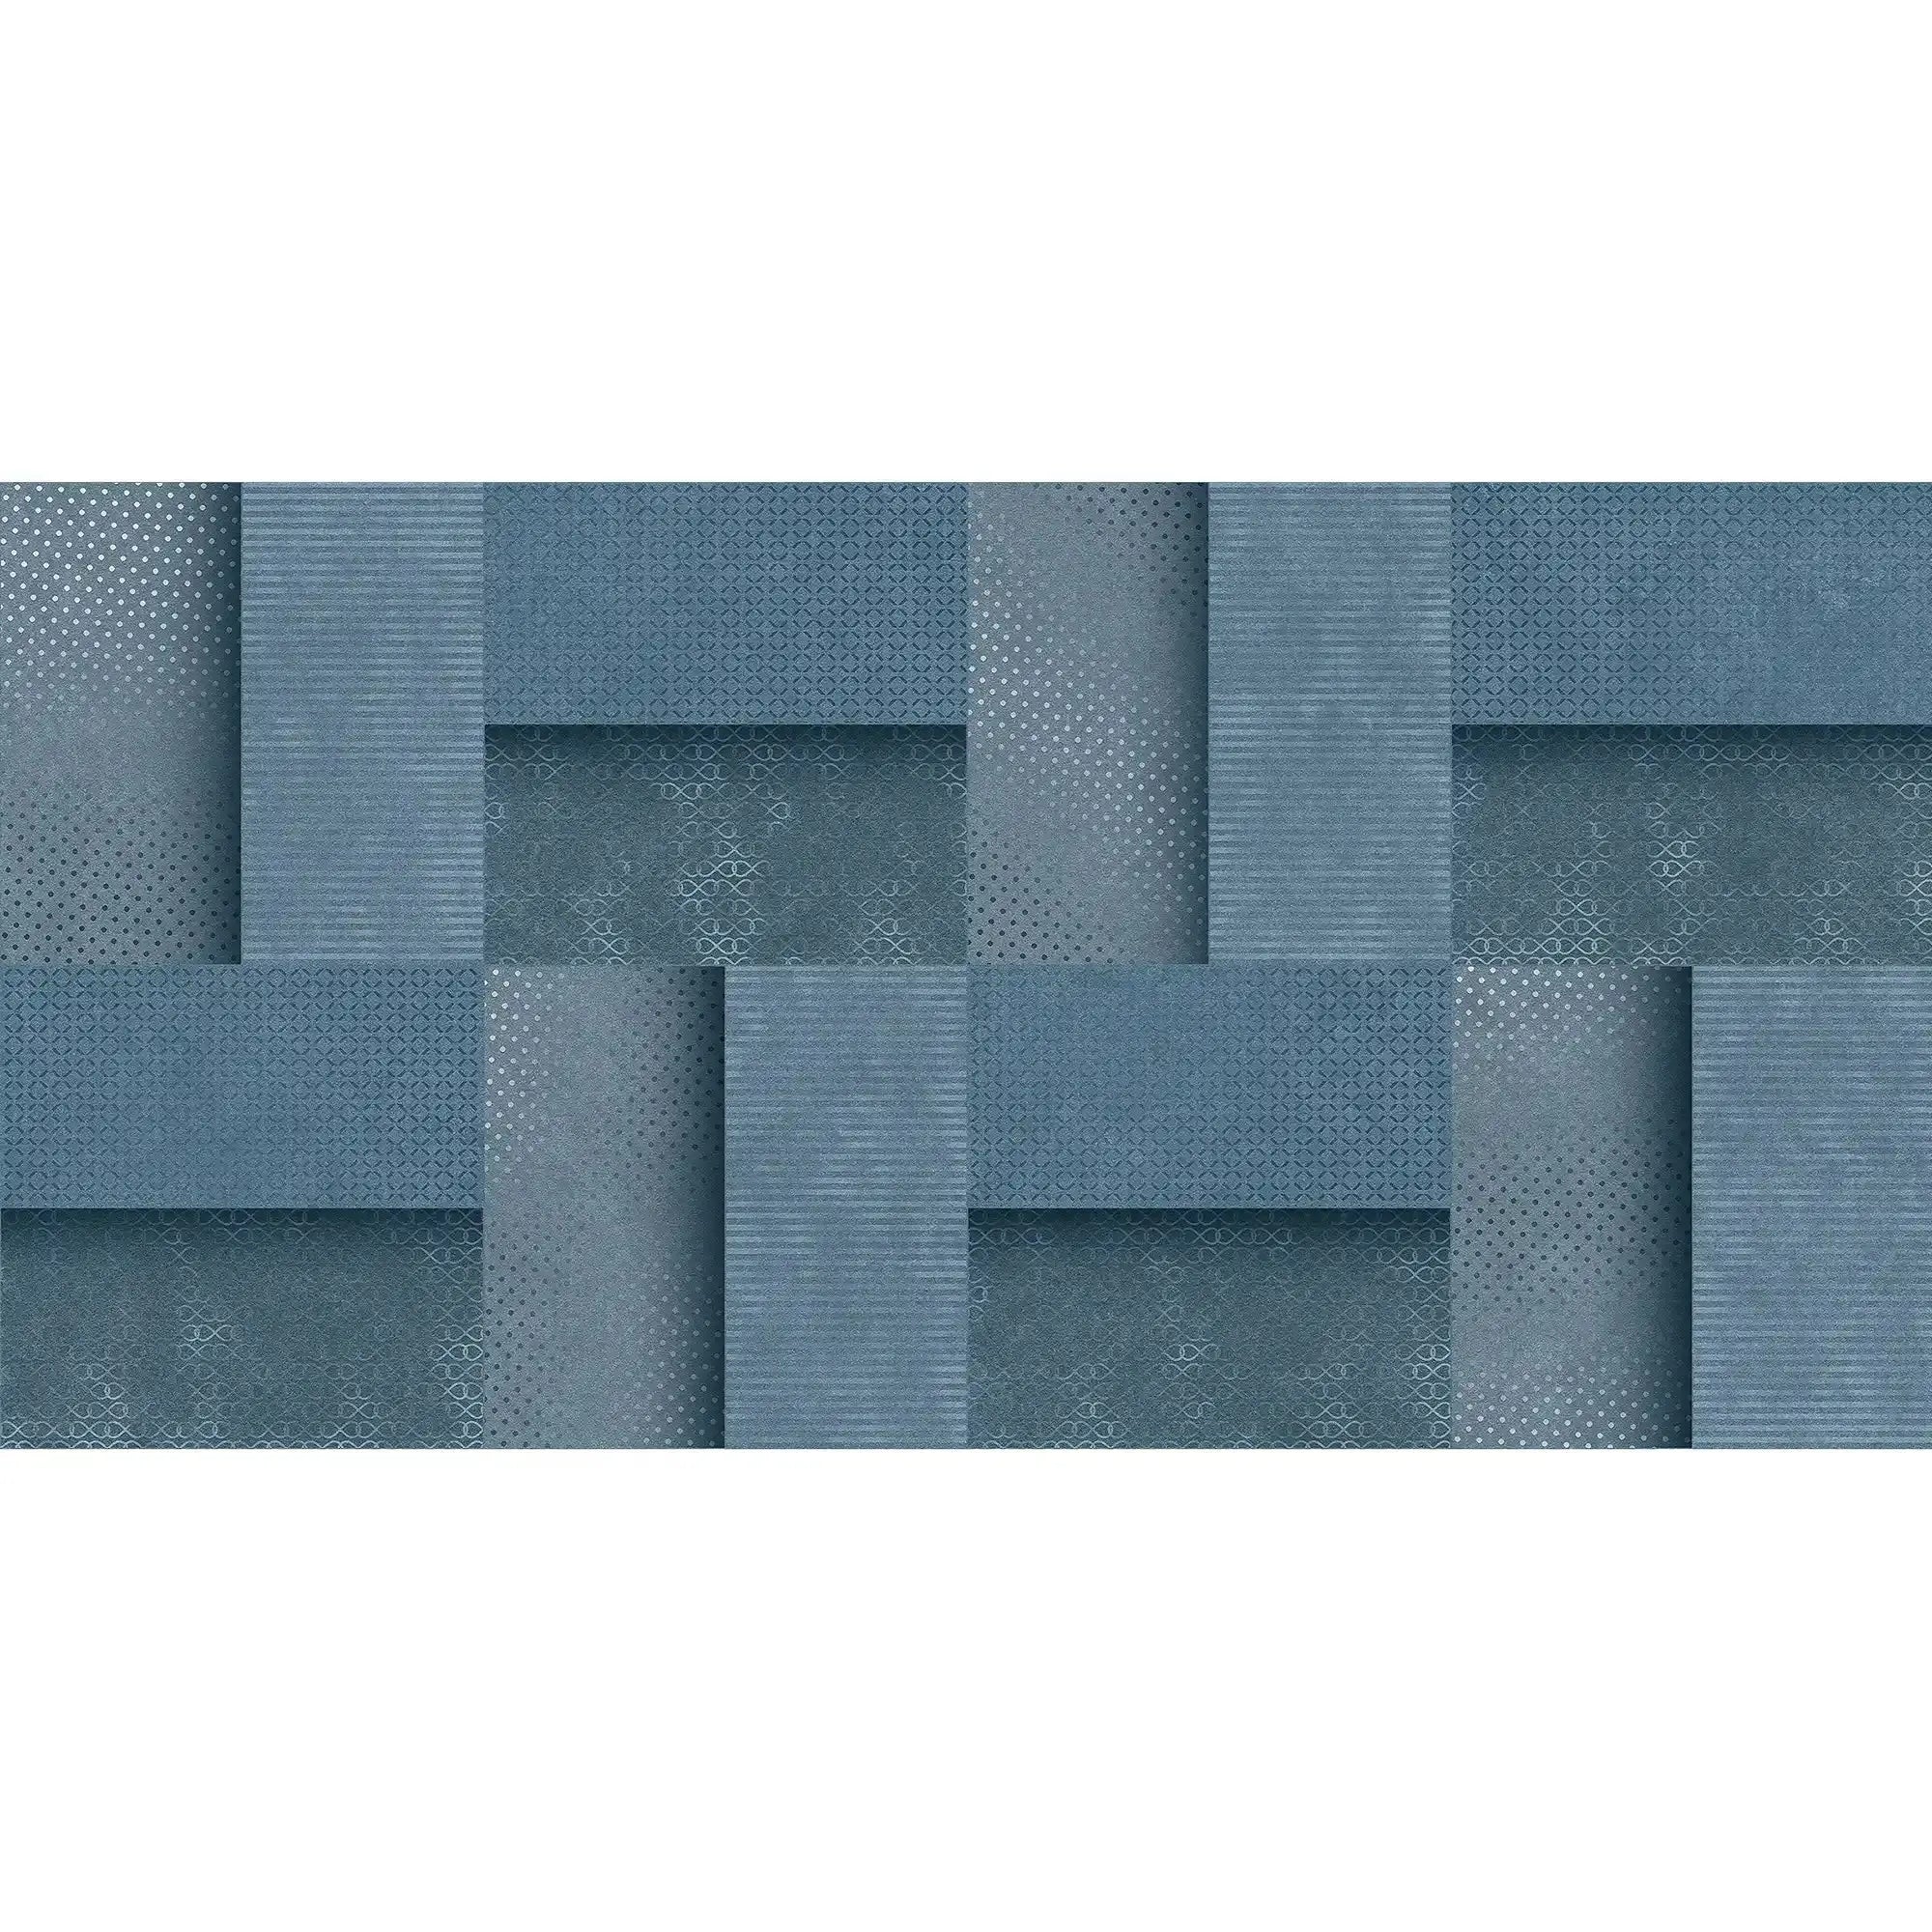 3082-A / Peel and Stick Wallpaper: Blue Tile Square Pattern, Easy Install, Adhesive Wall Decor for Bathroom, Kitchen, and Living Room - Artevella